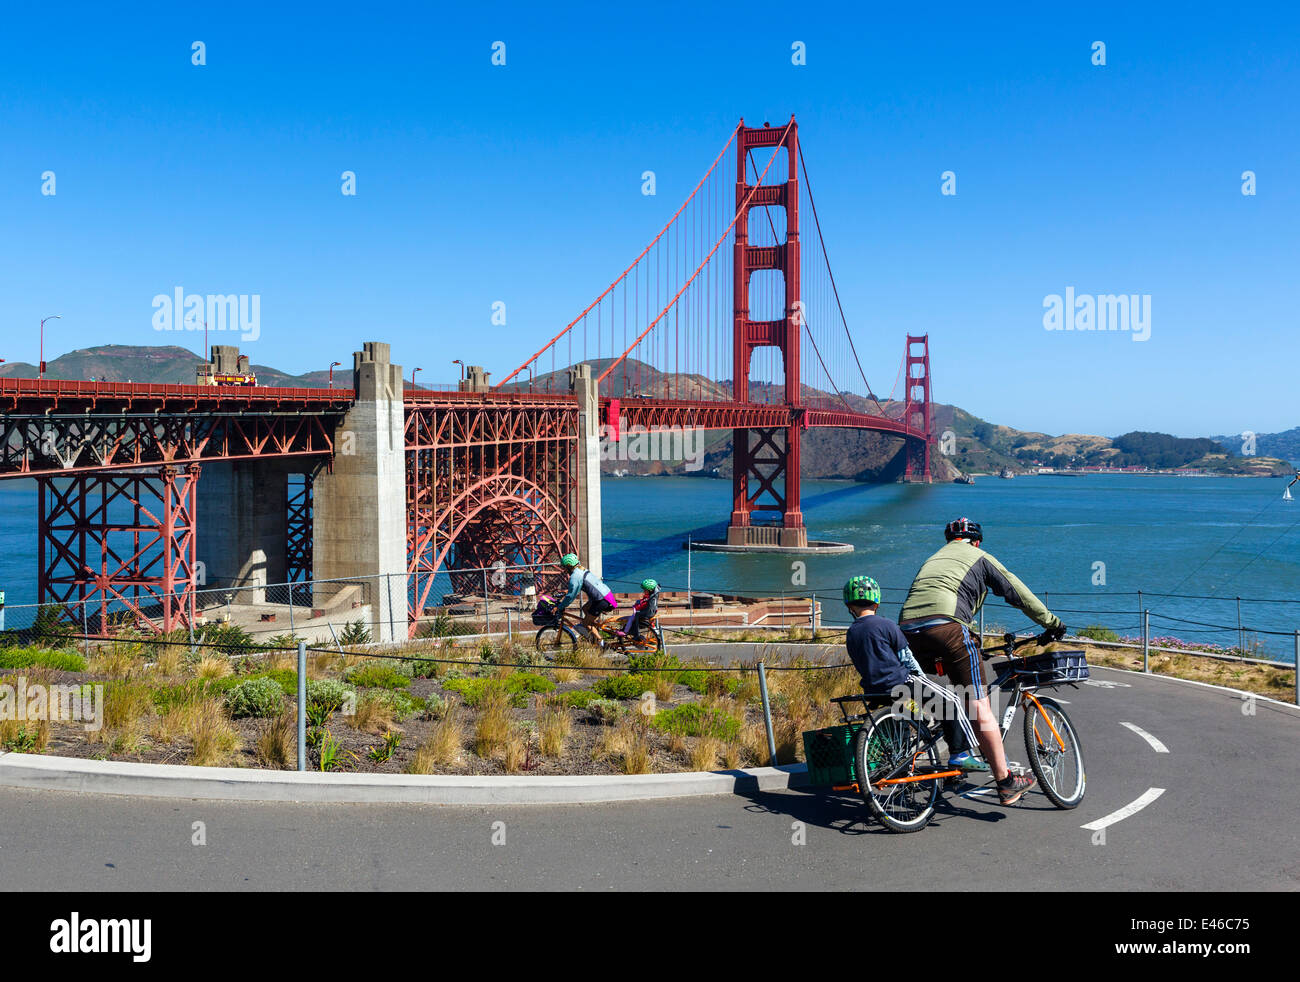 Cyclists on cycle path in front of the Golden Gate Bridge looking towards Sausalito, San Francisco, California, USA Stock Photo